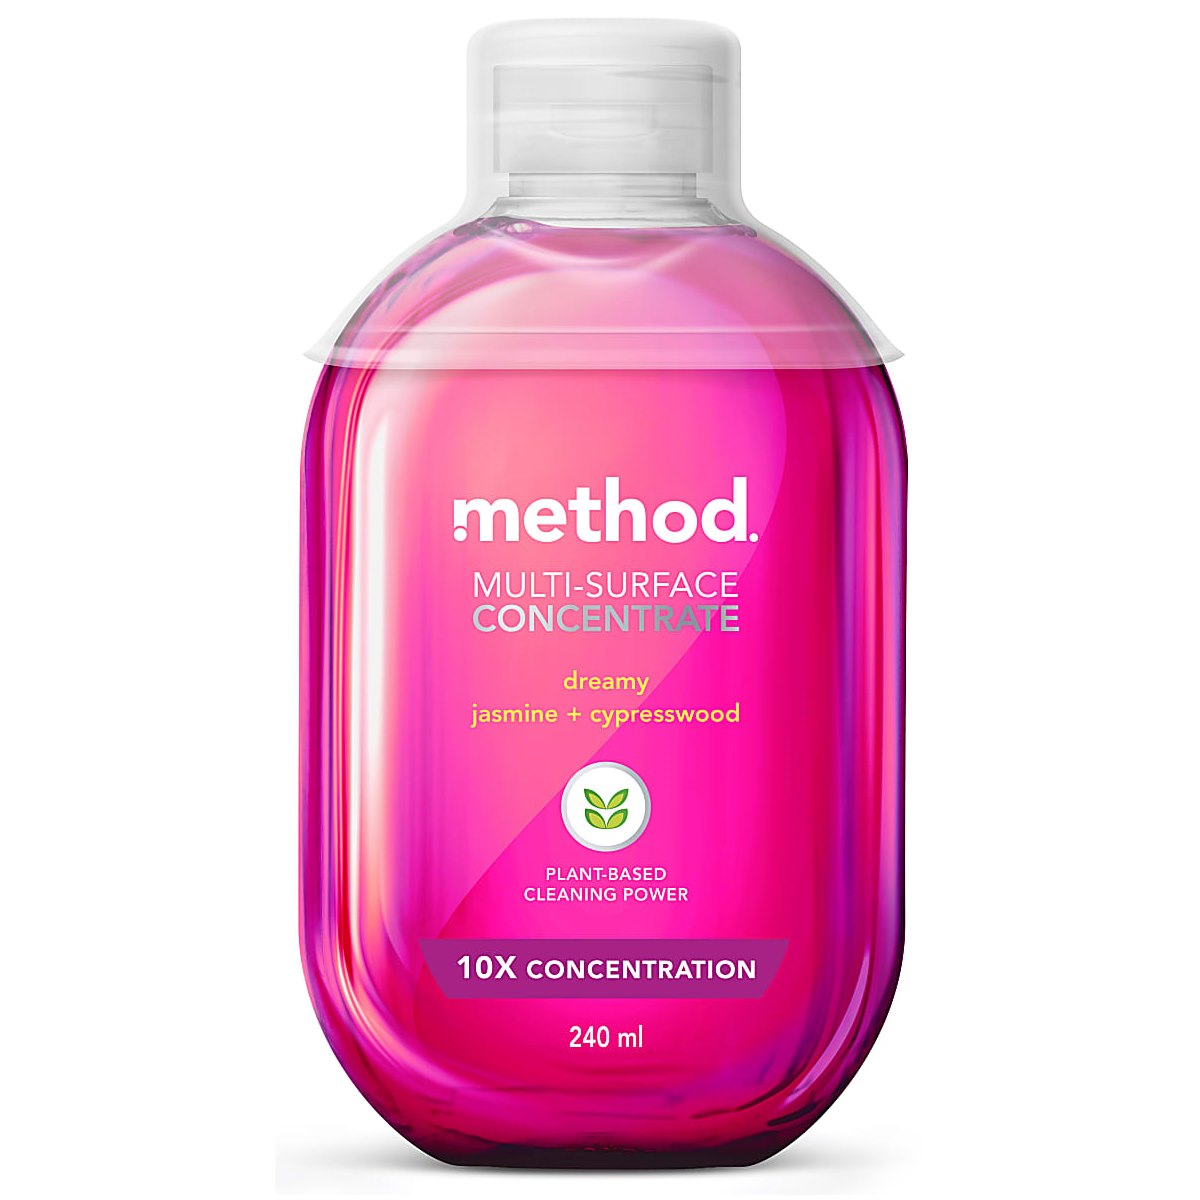 Method Multi Surface Cleaner Concentrate 240ml Dreamy Jasmine + Cypress Wood